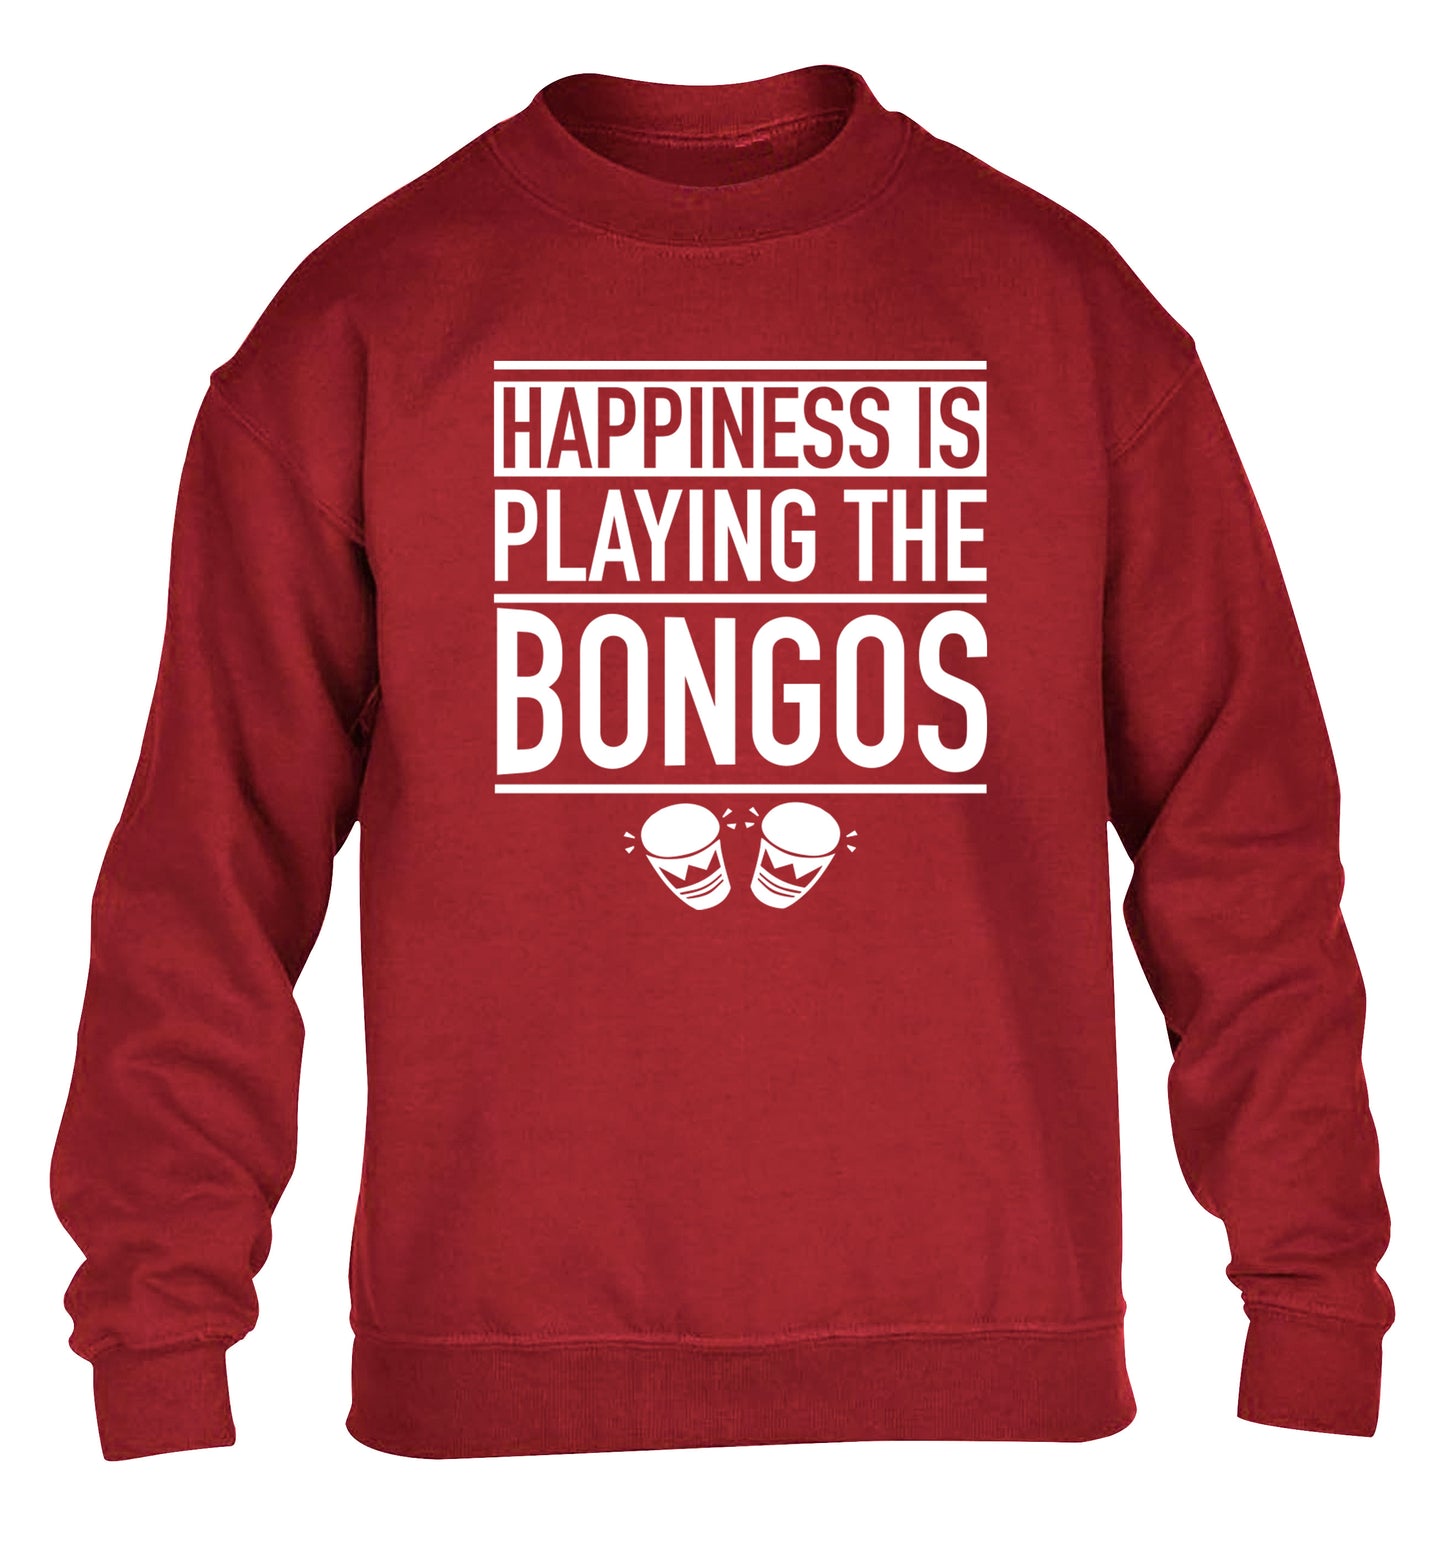 Happiness is playing the bongos children's grey sweater 12-14 Years